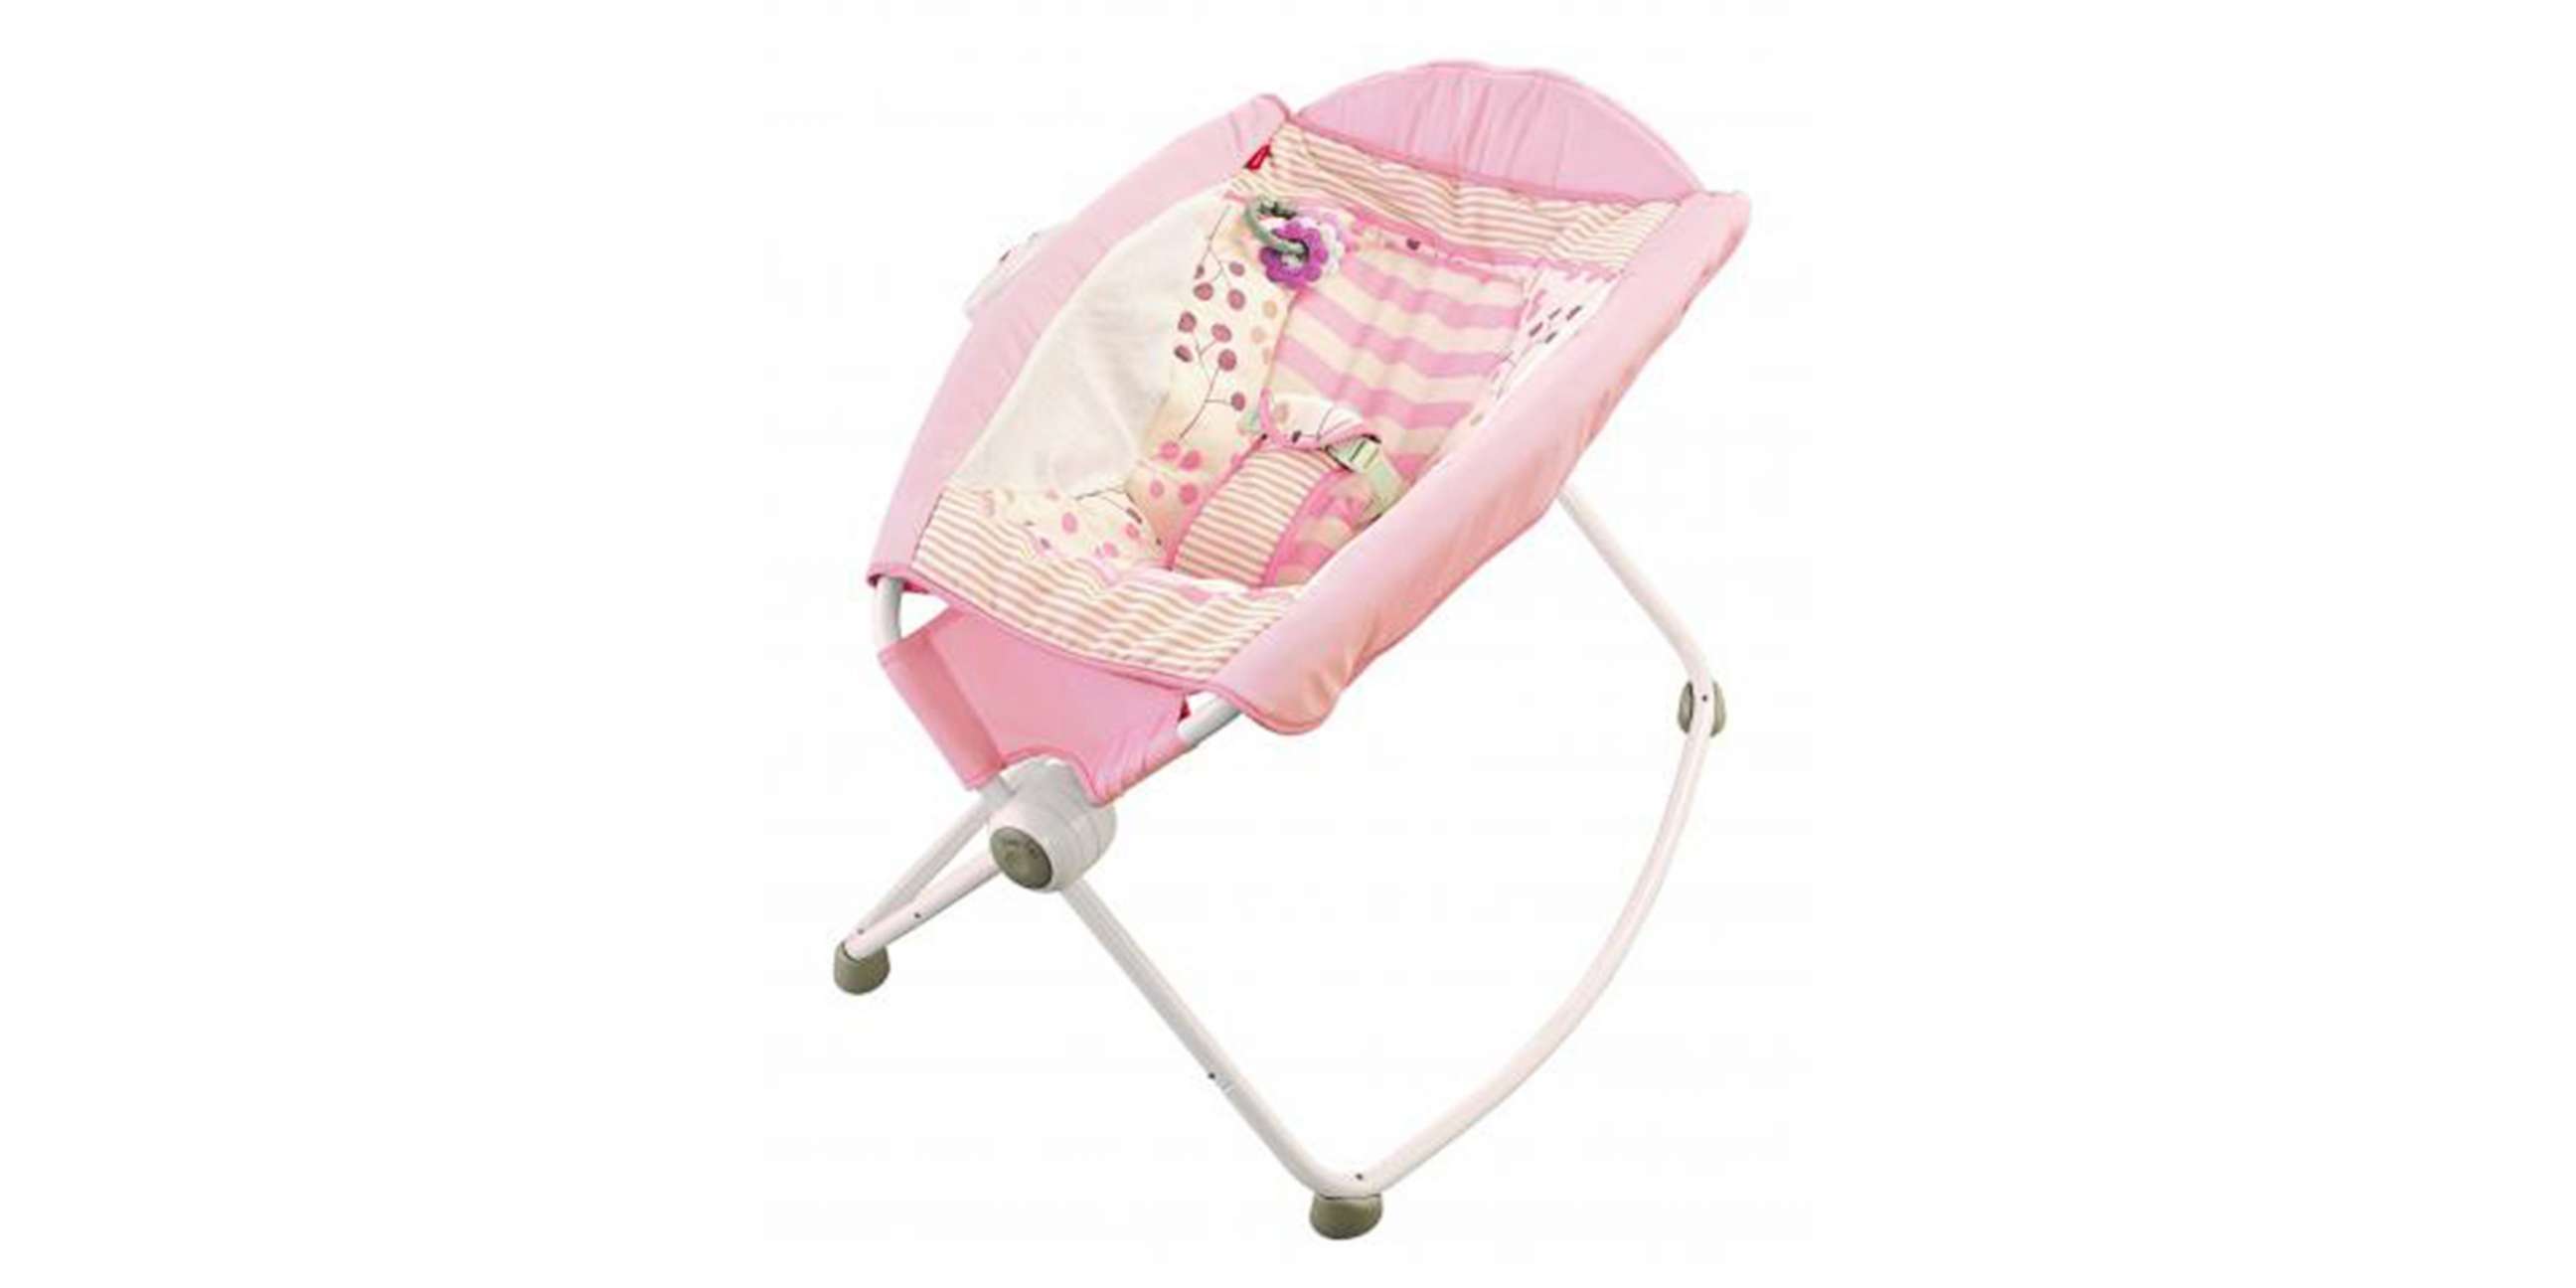 PHOTO: On April 5, 2019, the Consumer Product Safety Commission and Fisher-Price released a warning to customers who purchased the Fisher-Price Rock 'n Play due to reports of multiple infant deaths since 2015.